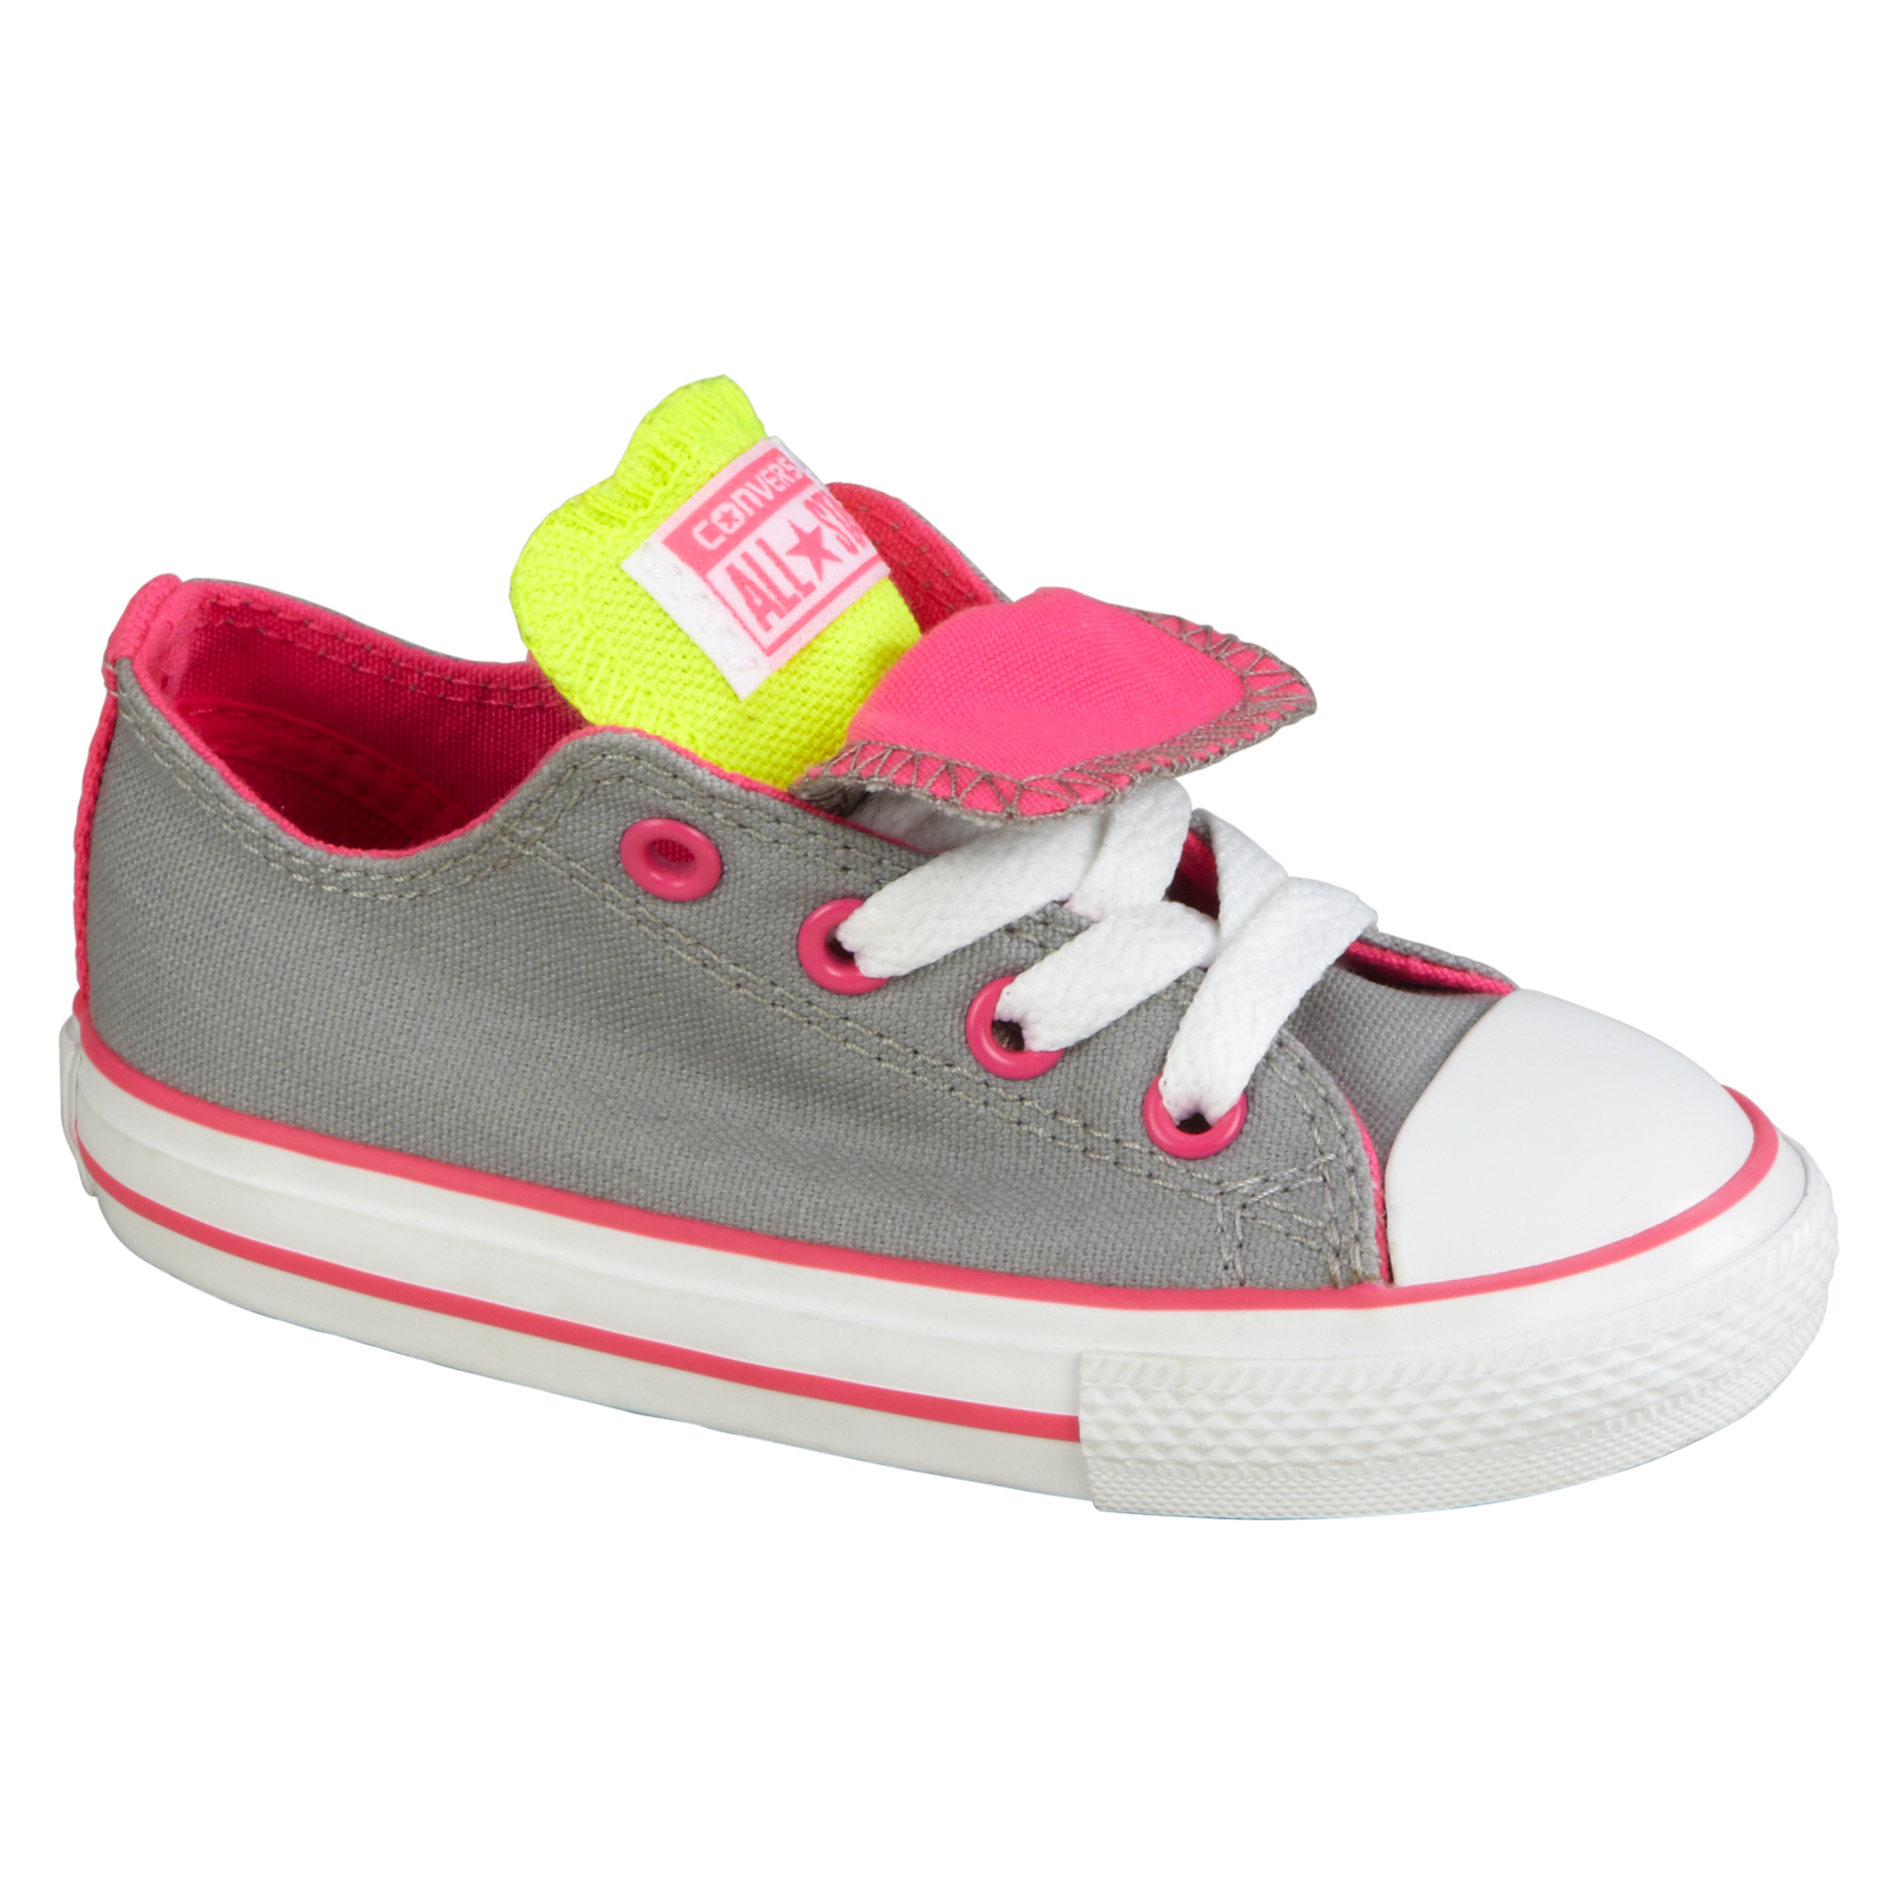 Toddler Girl's Chuck Taylor Double Tongue - Grey/Pink/Lime